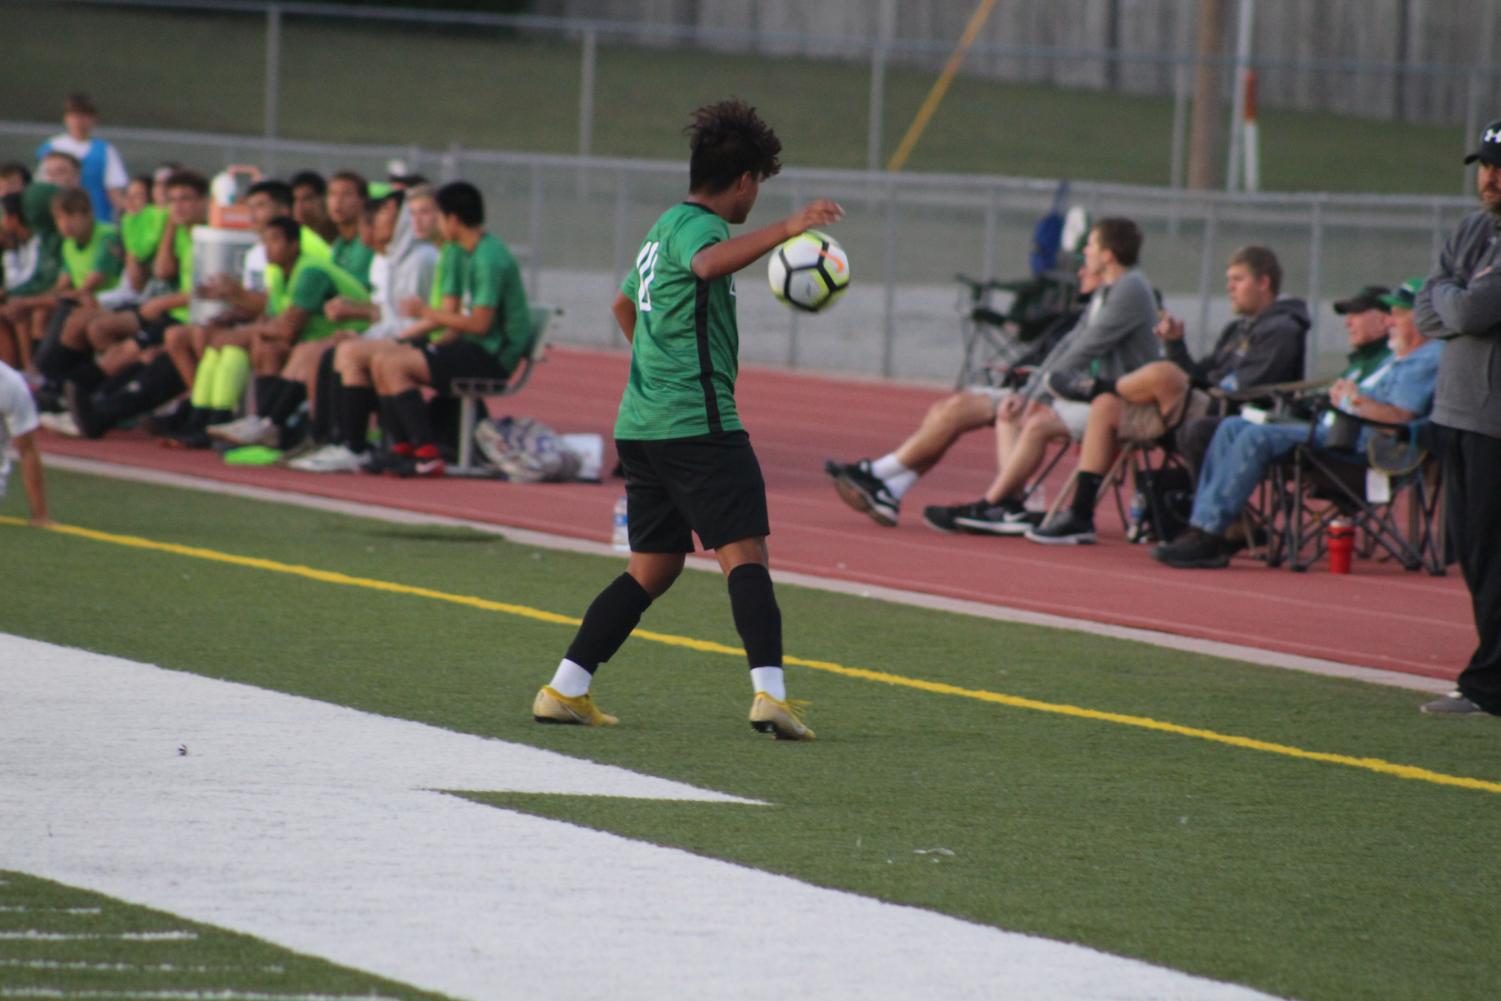 Derby+Vs.+Campus+boys+soccer+photo+gallery+%28Photos+by+Blake+Chadwick%29s